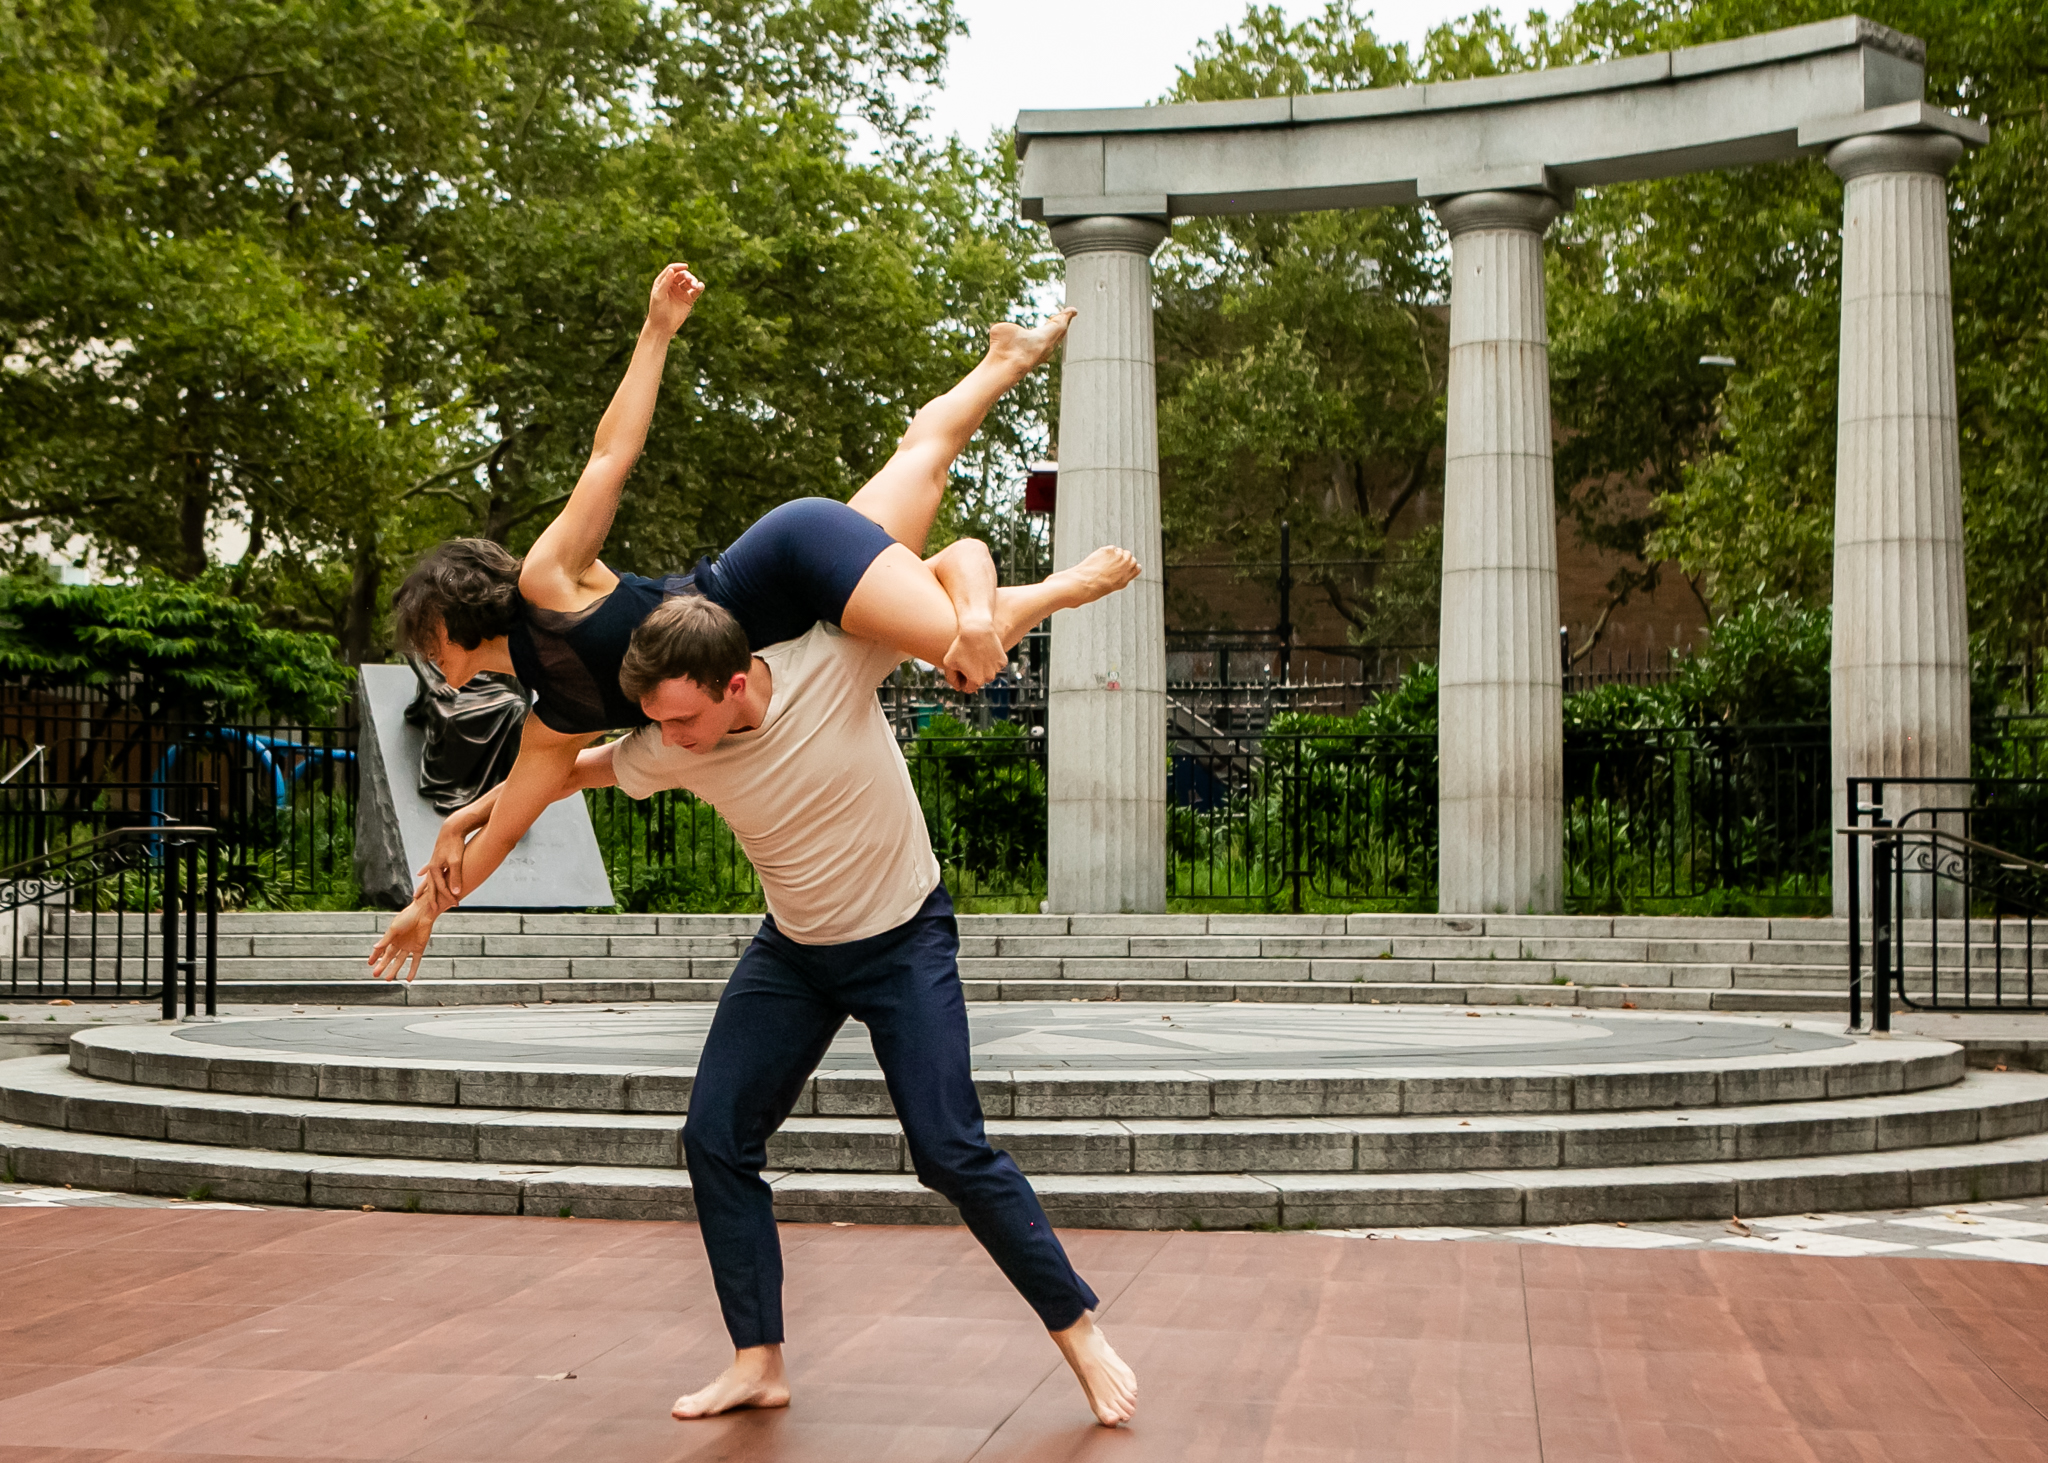 Male dancer lifting a female dancer across his shoulders as though she is flying